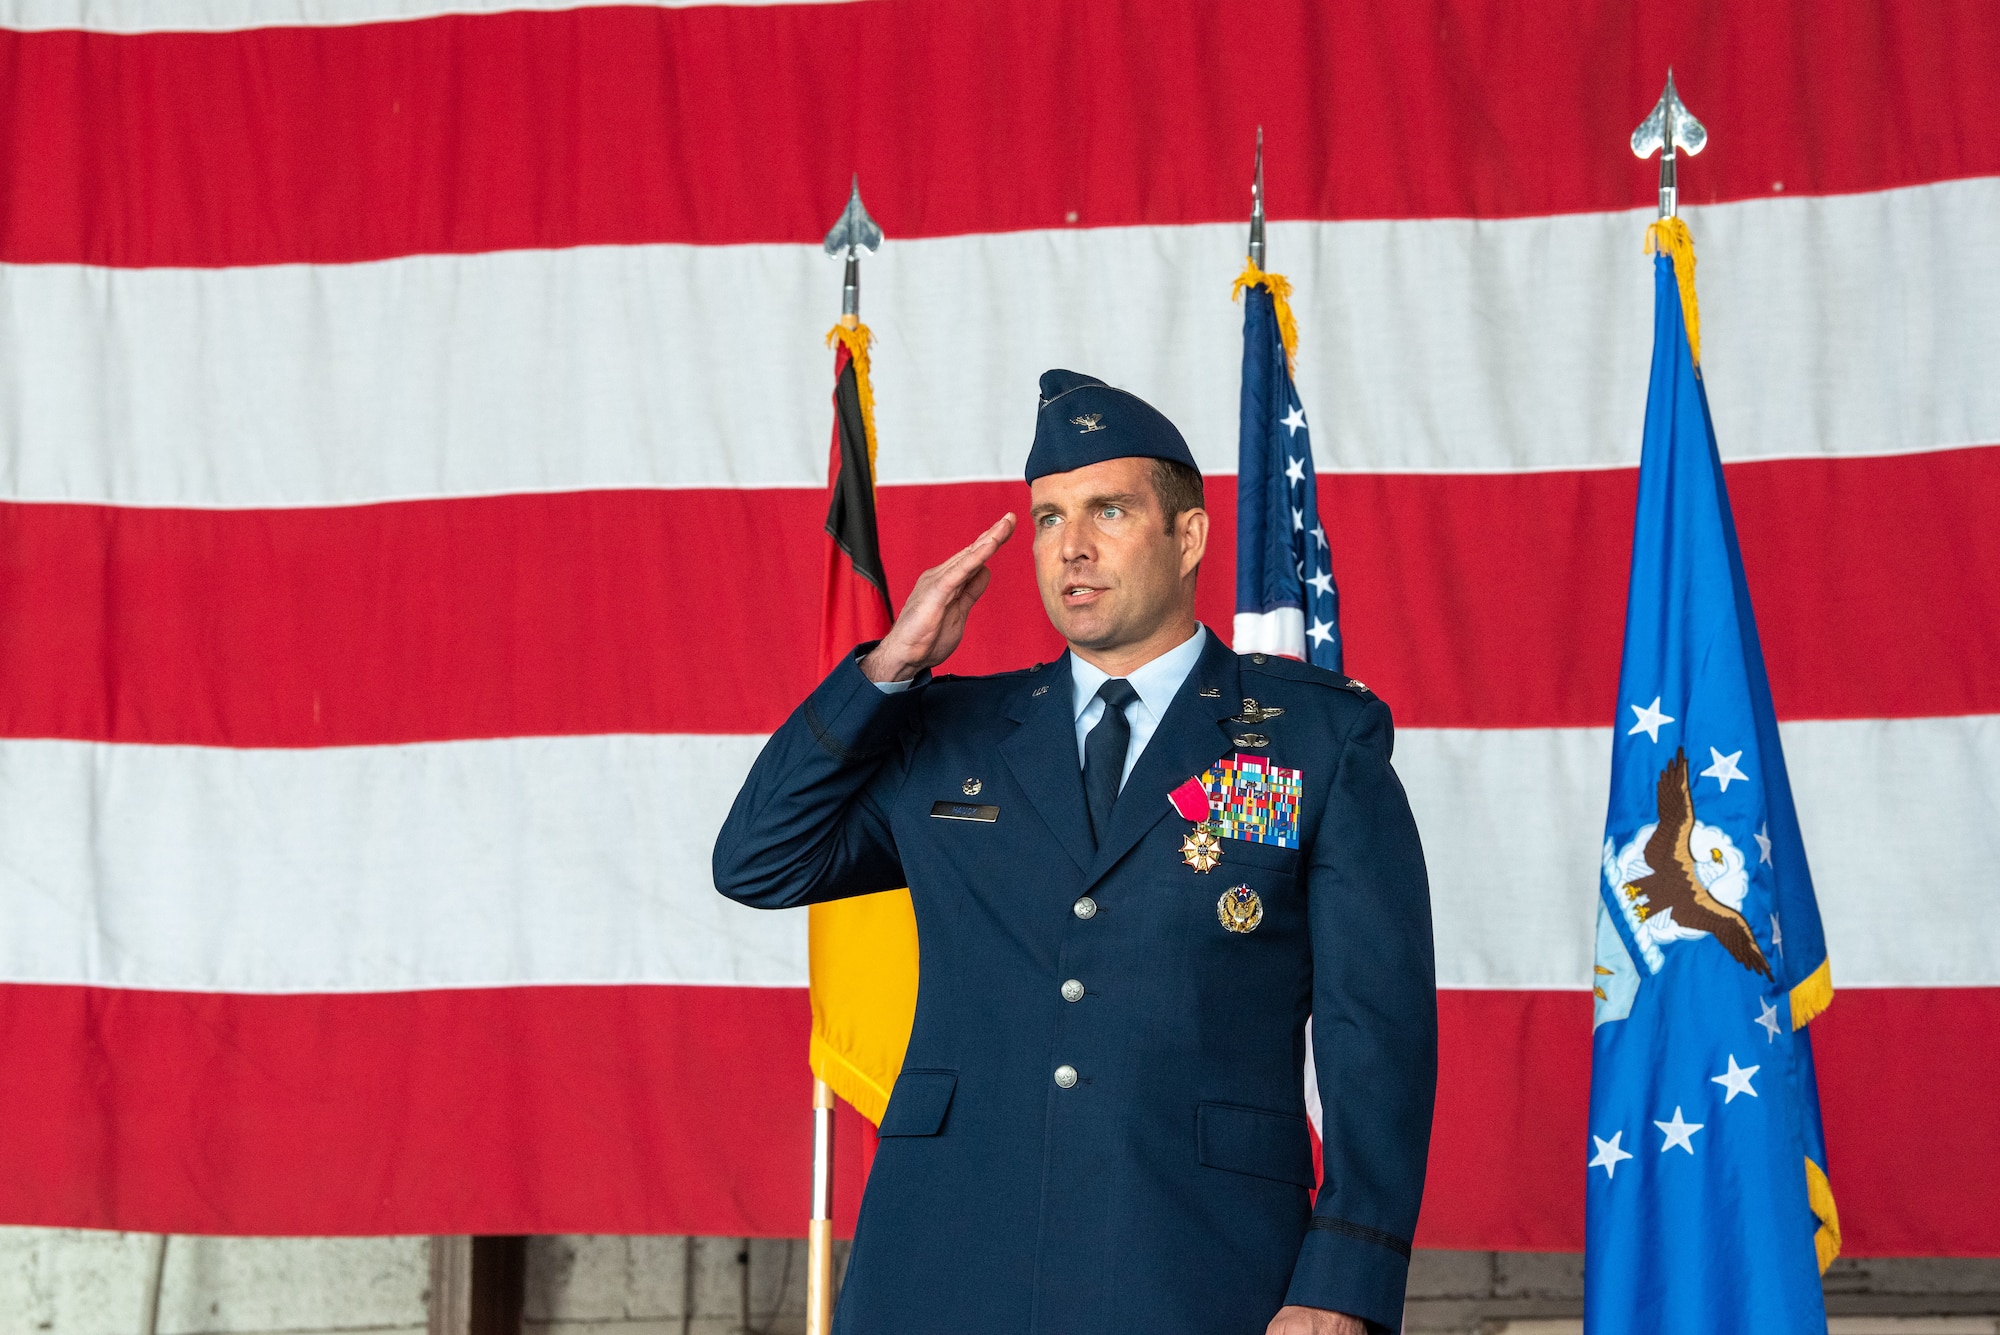 U.S. Air Force Col. Leslie Hauck, 52nd Fighter Wing outgoing commander, renders a final salute to members of the 52nd FW during a change of command ceremony